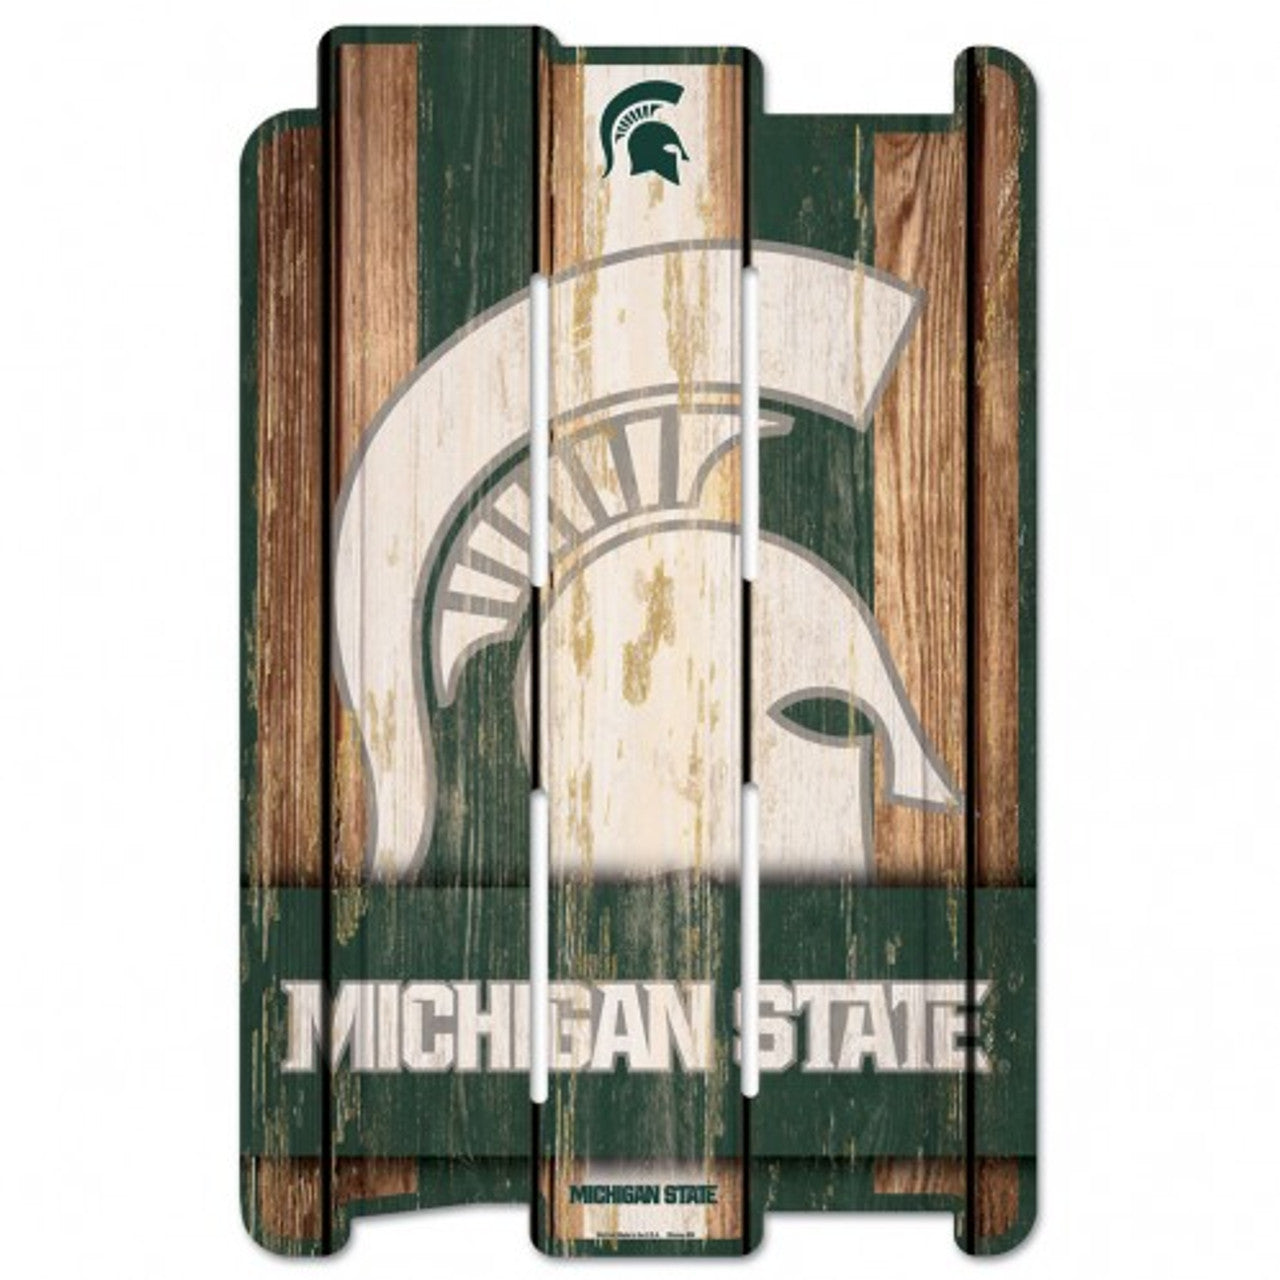 Michigan State Spartans 11" x 17" Wood Fence Sign by Wincraft